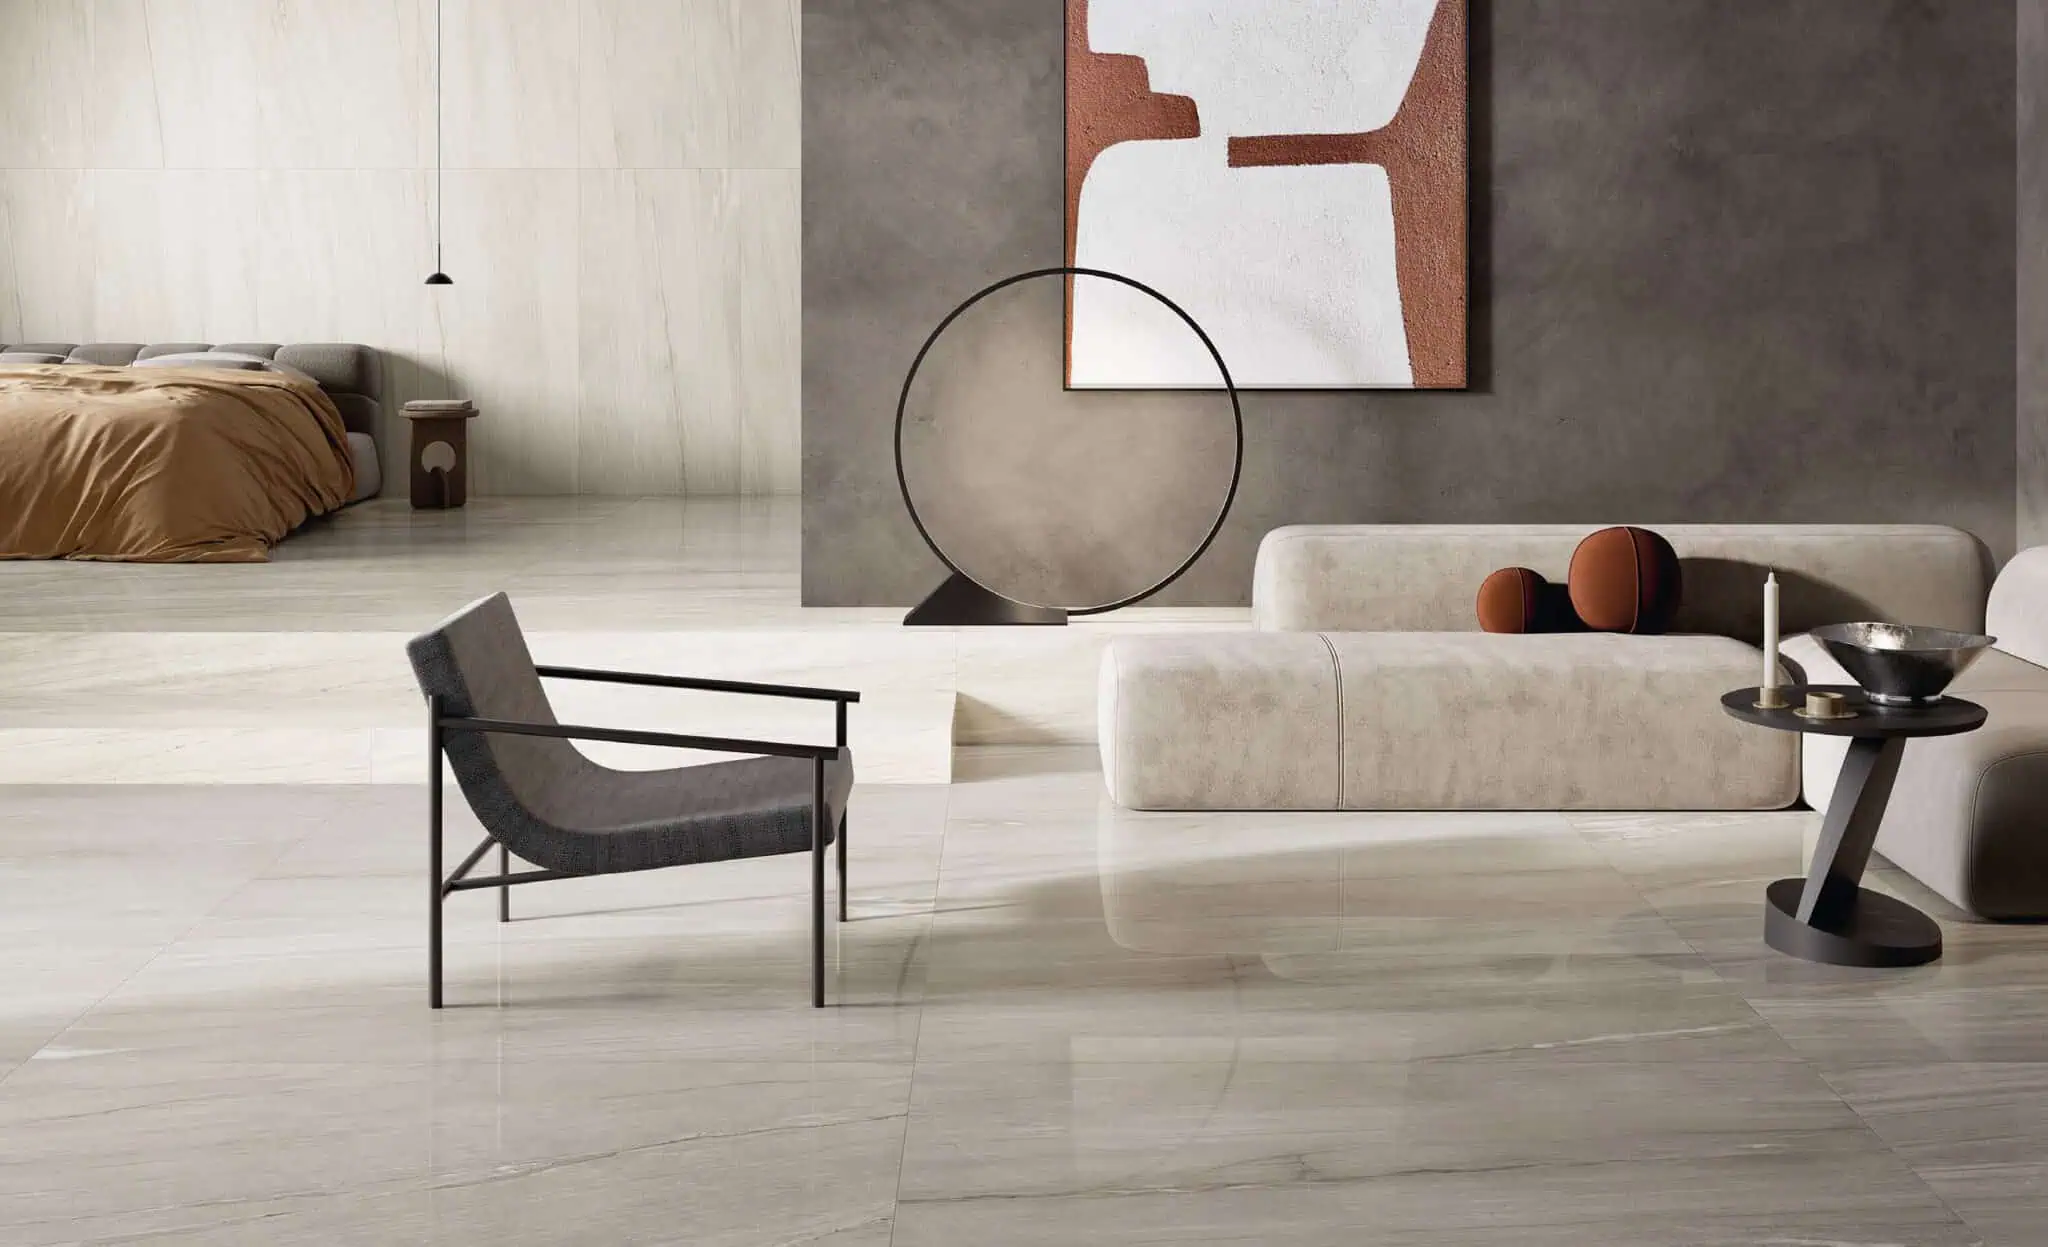 Porcelain Tile Natural Stone Look - CRYSTAL Collection